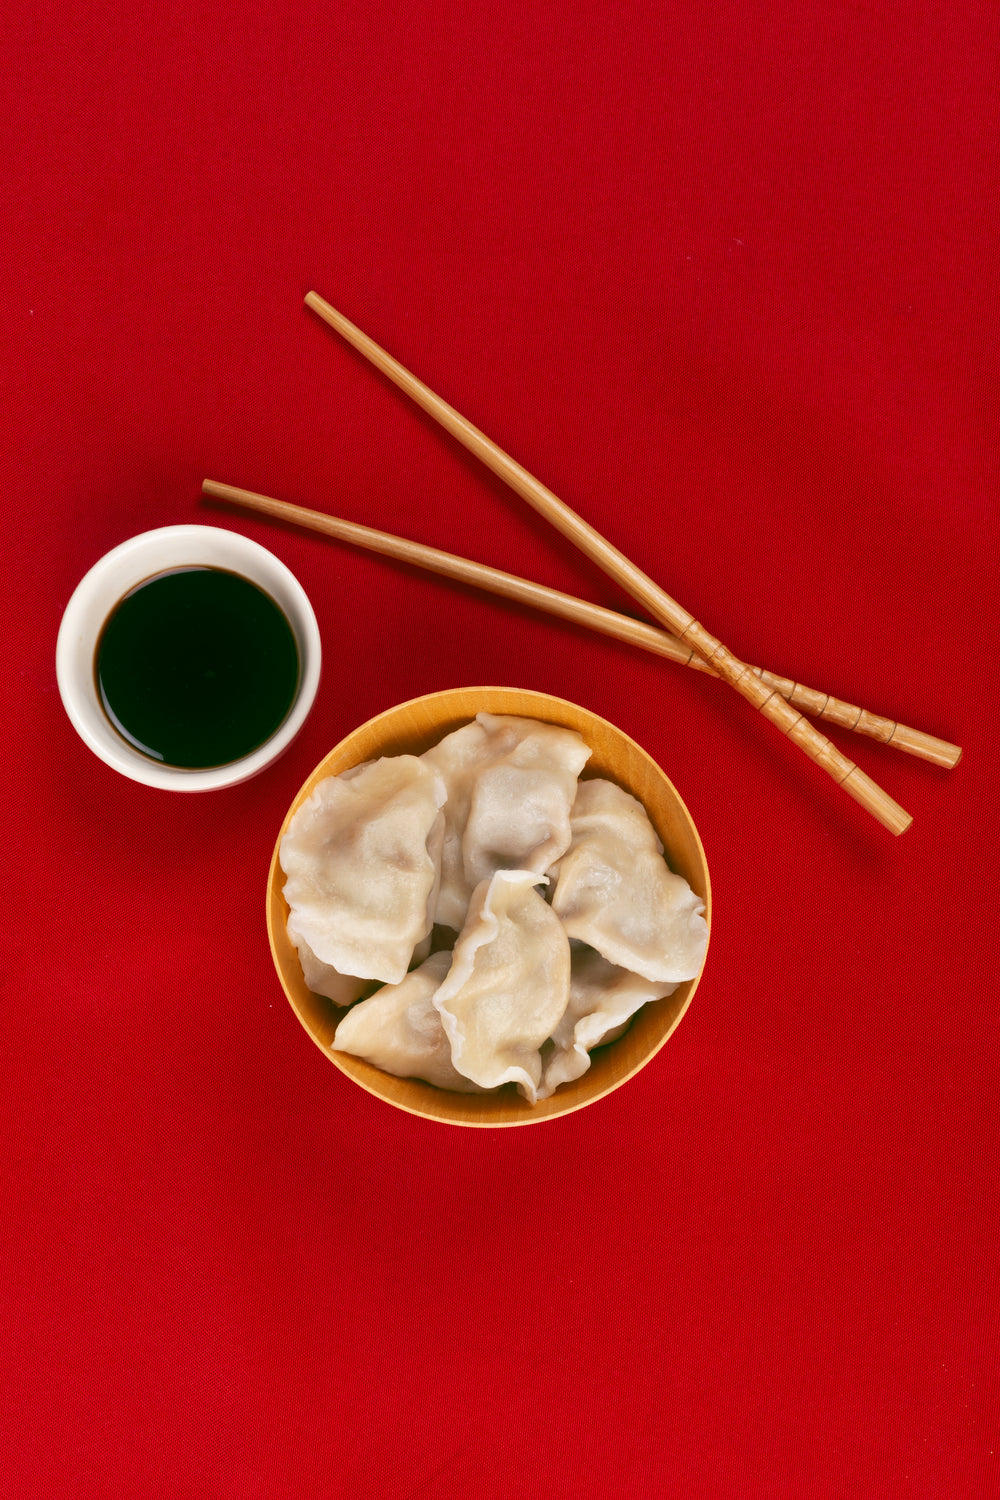 dumplings chopsticks and sauce on a red cloth viewed from above